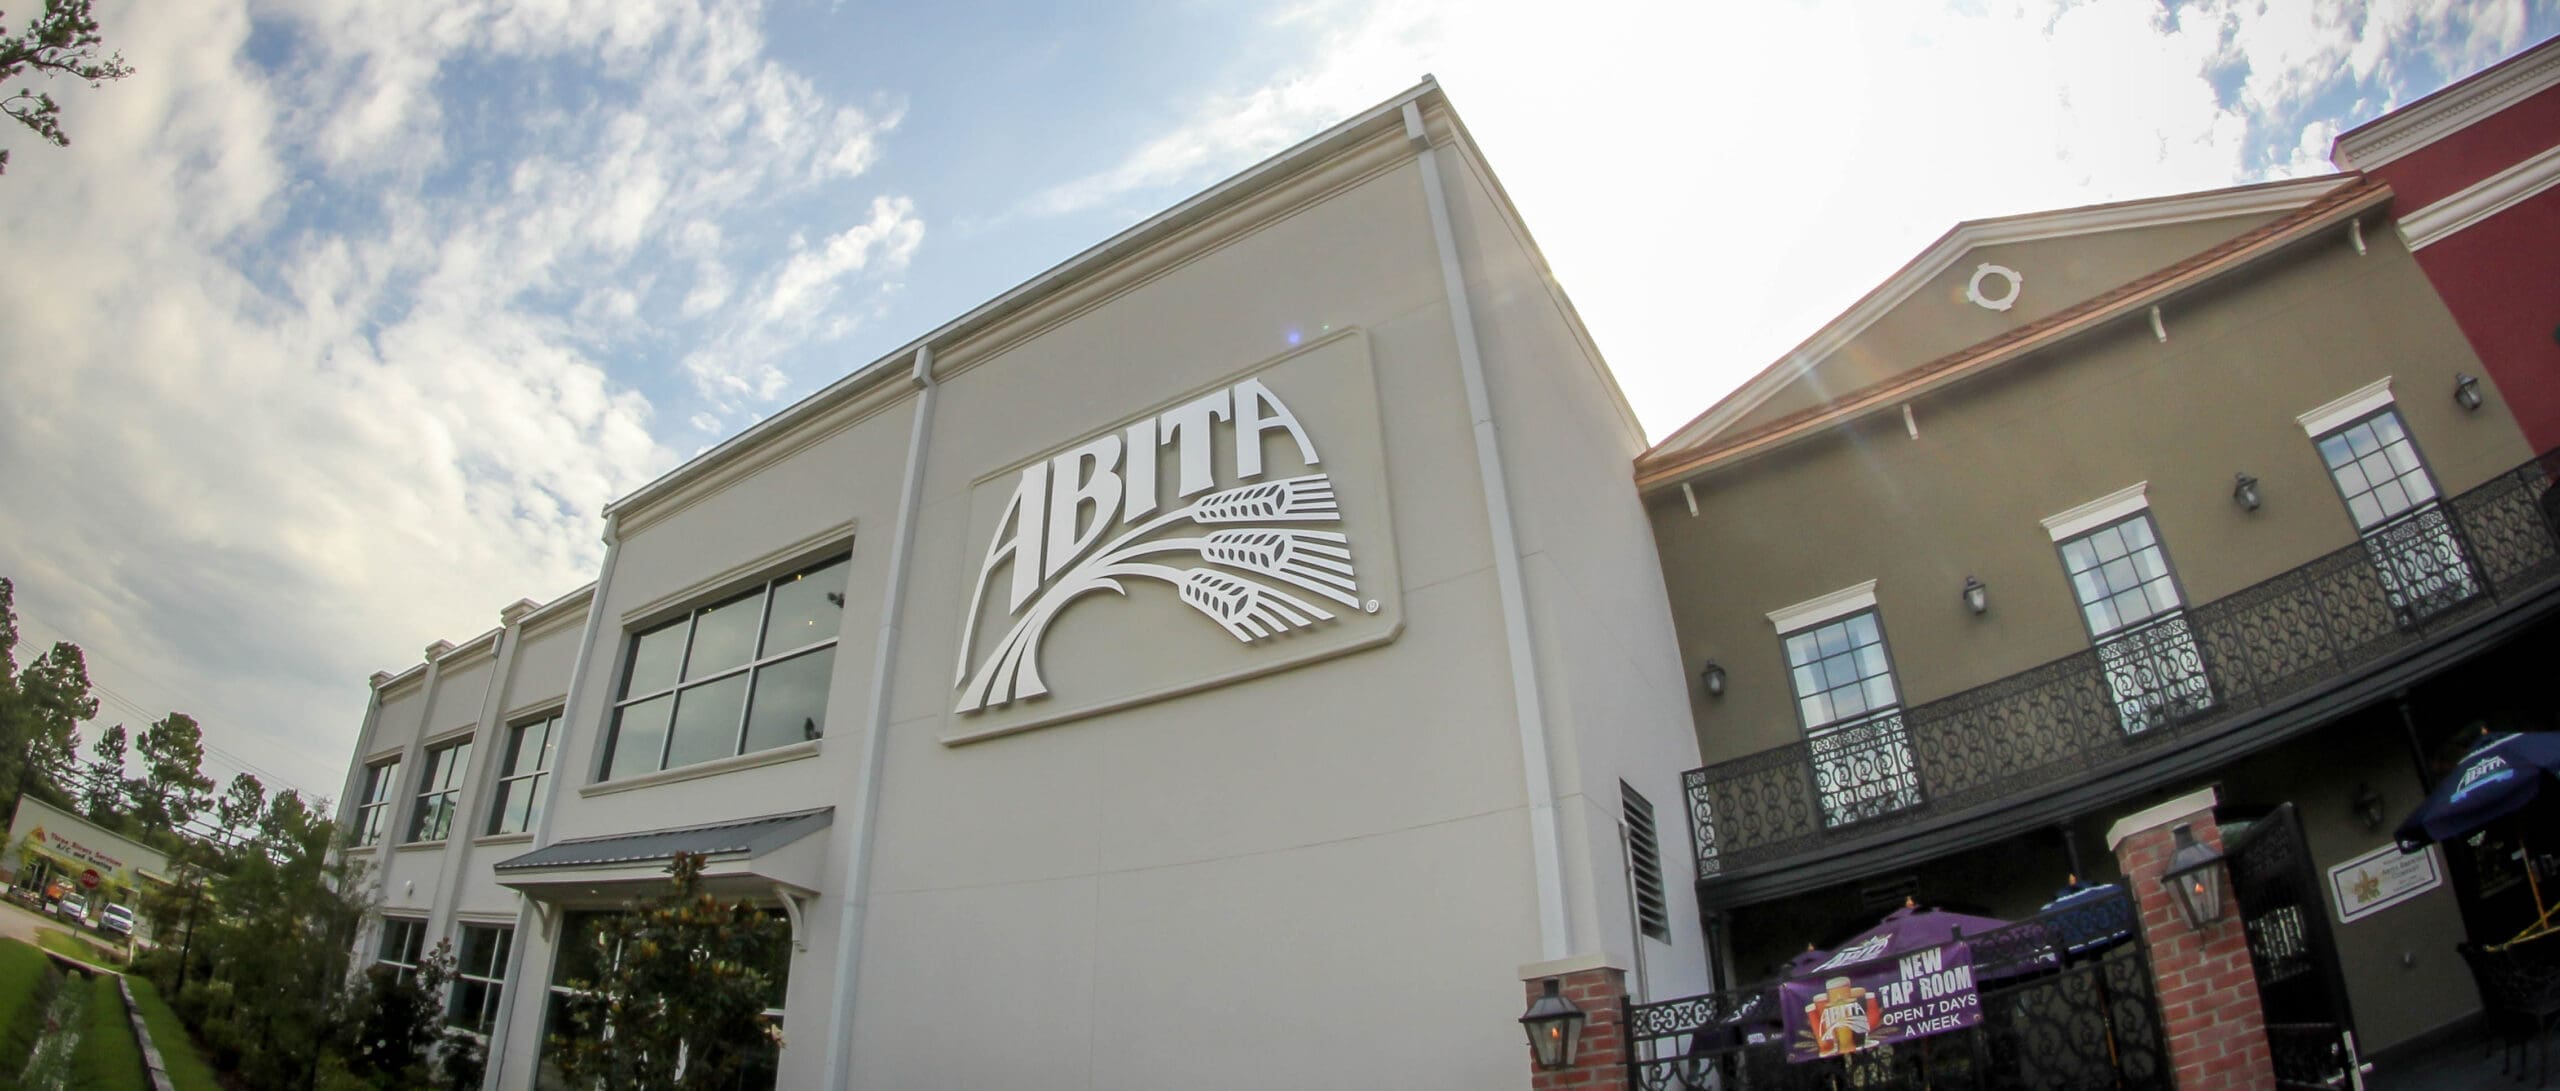 street view of the outside of the abita brewery with abita logo at the center